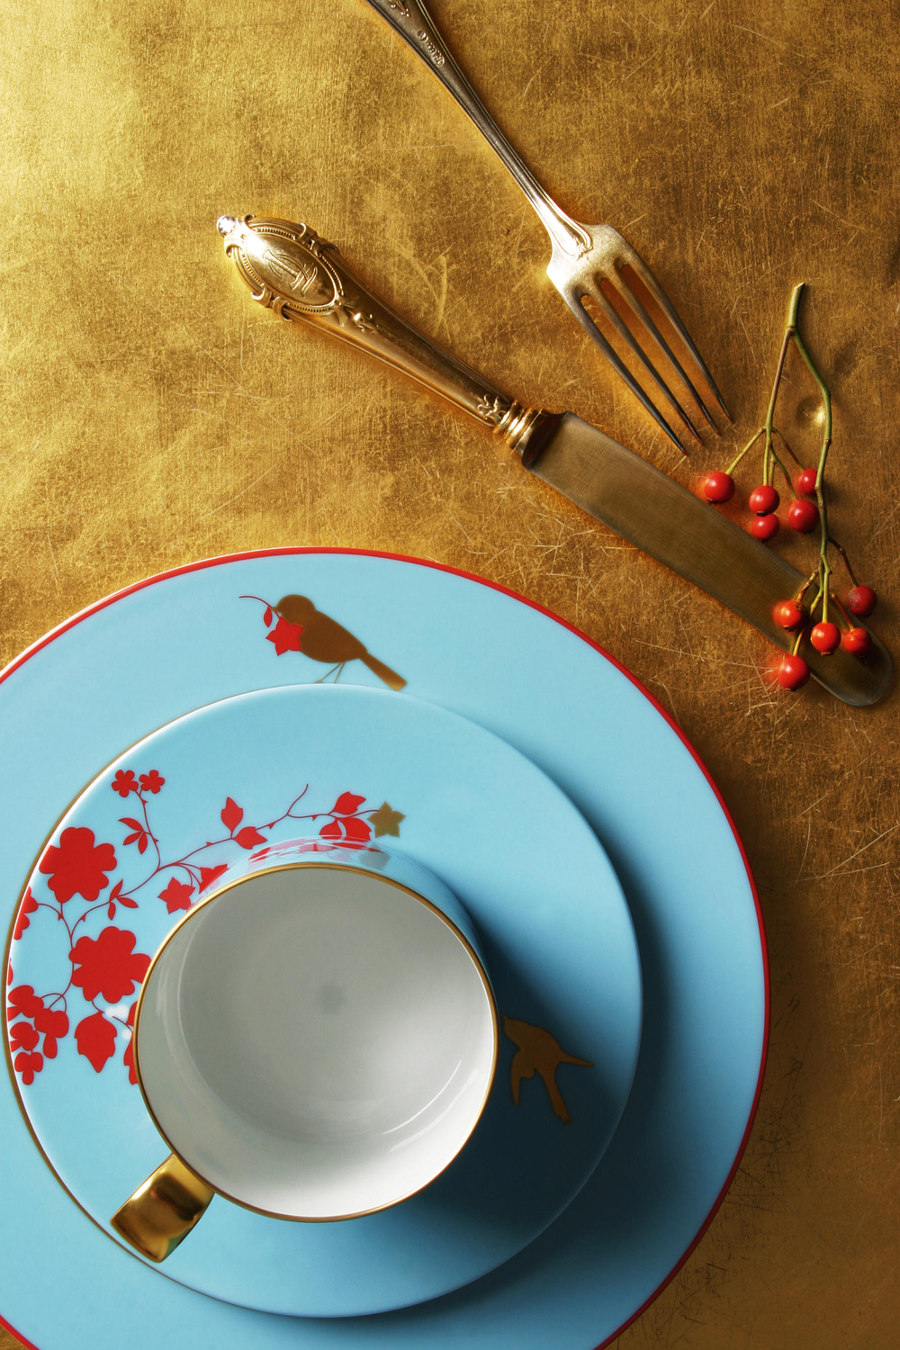 Ten tableware items for successful dinner parties | News